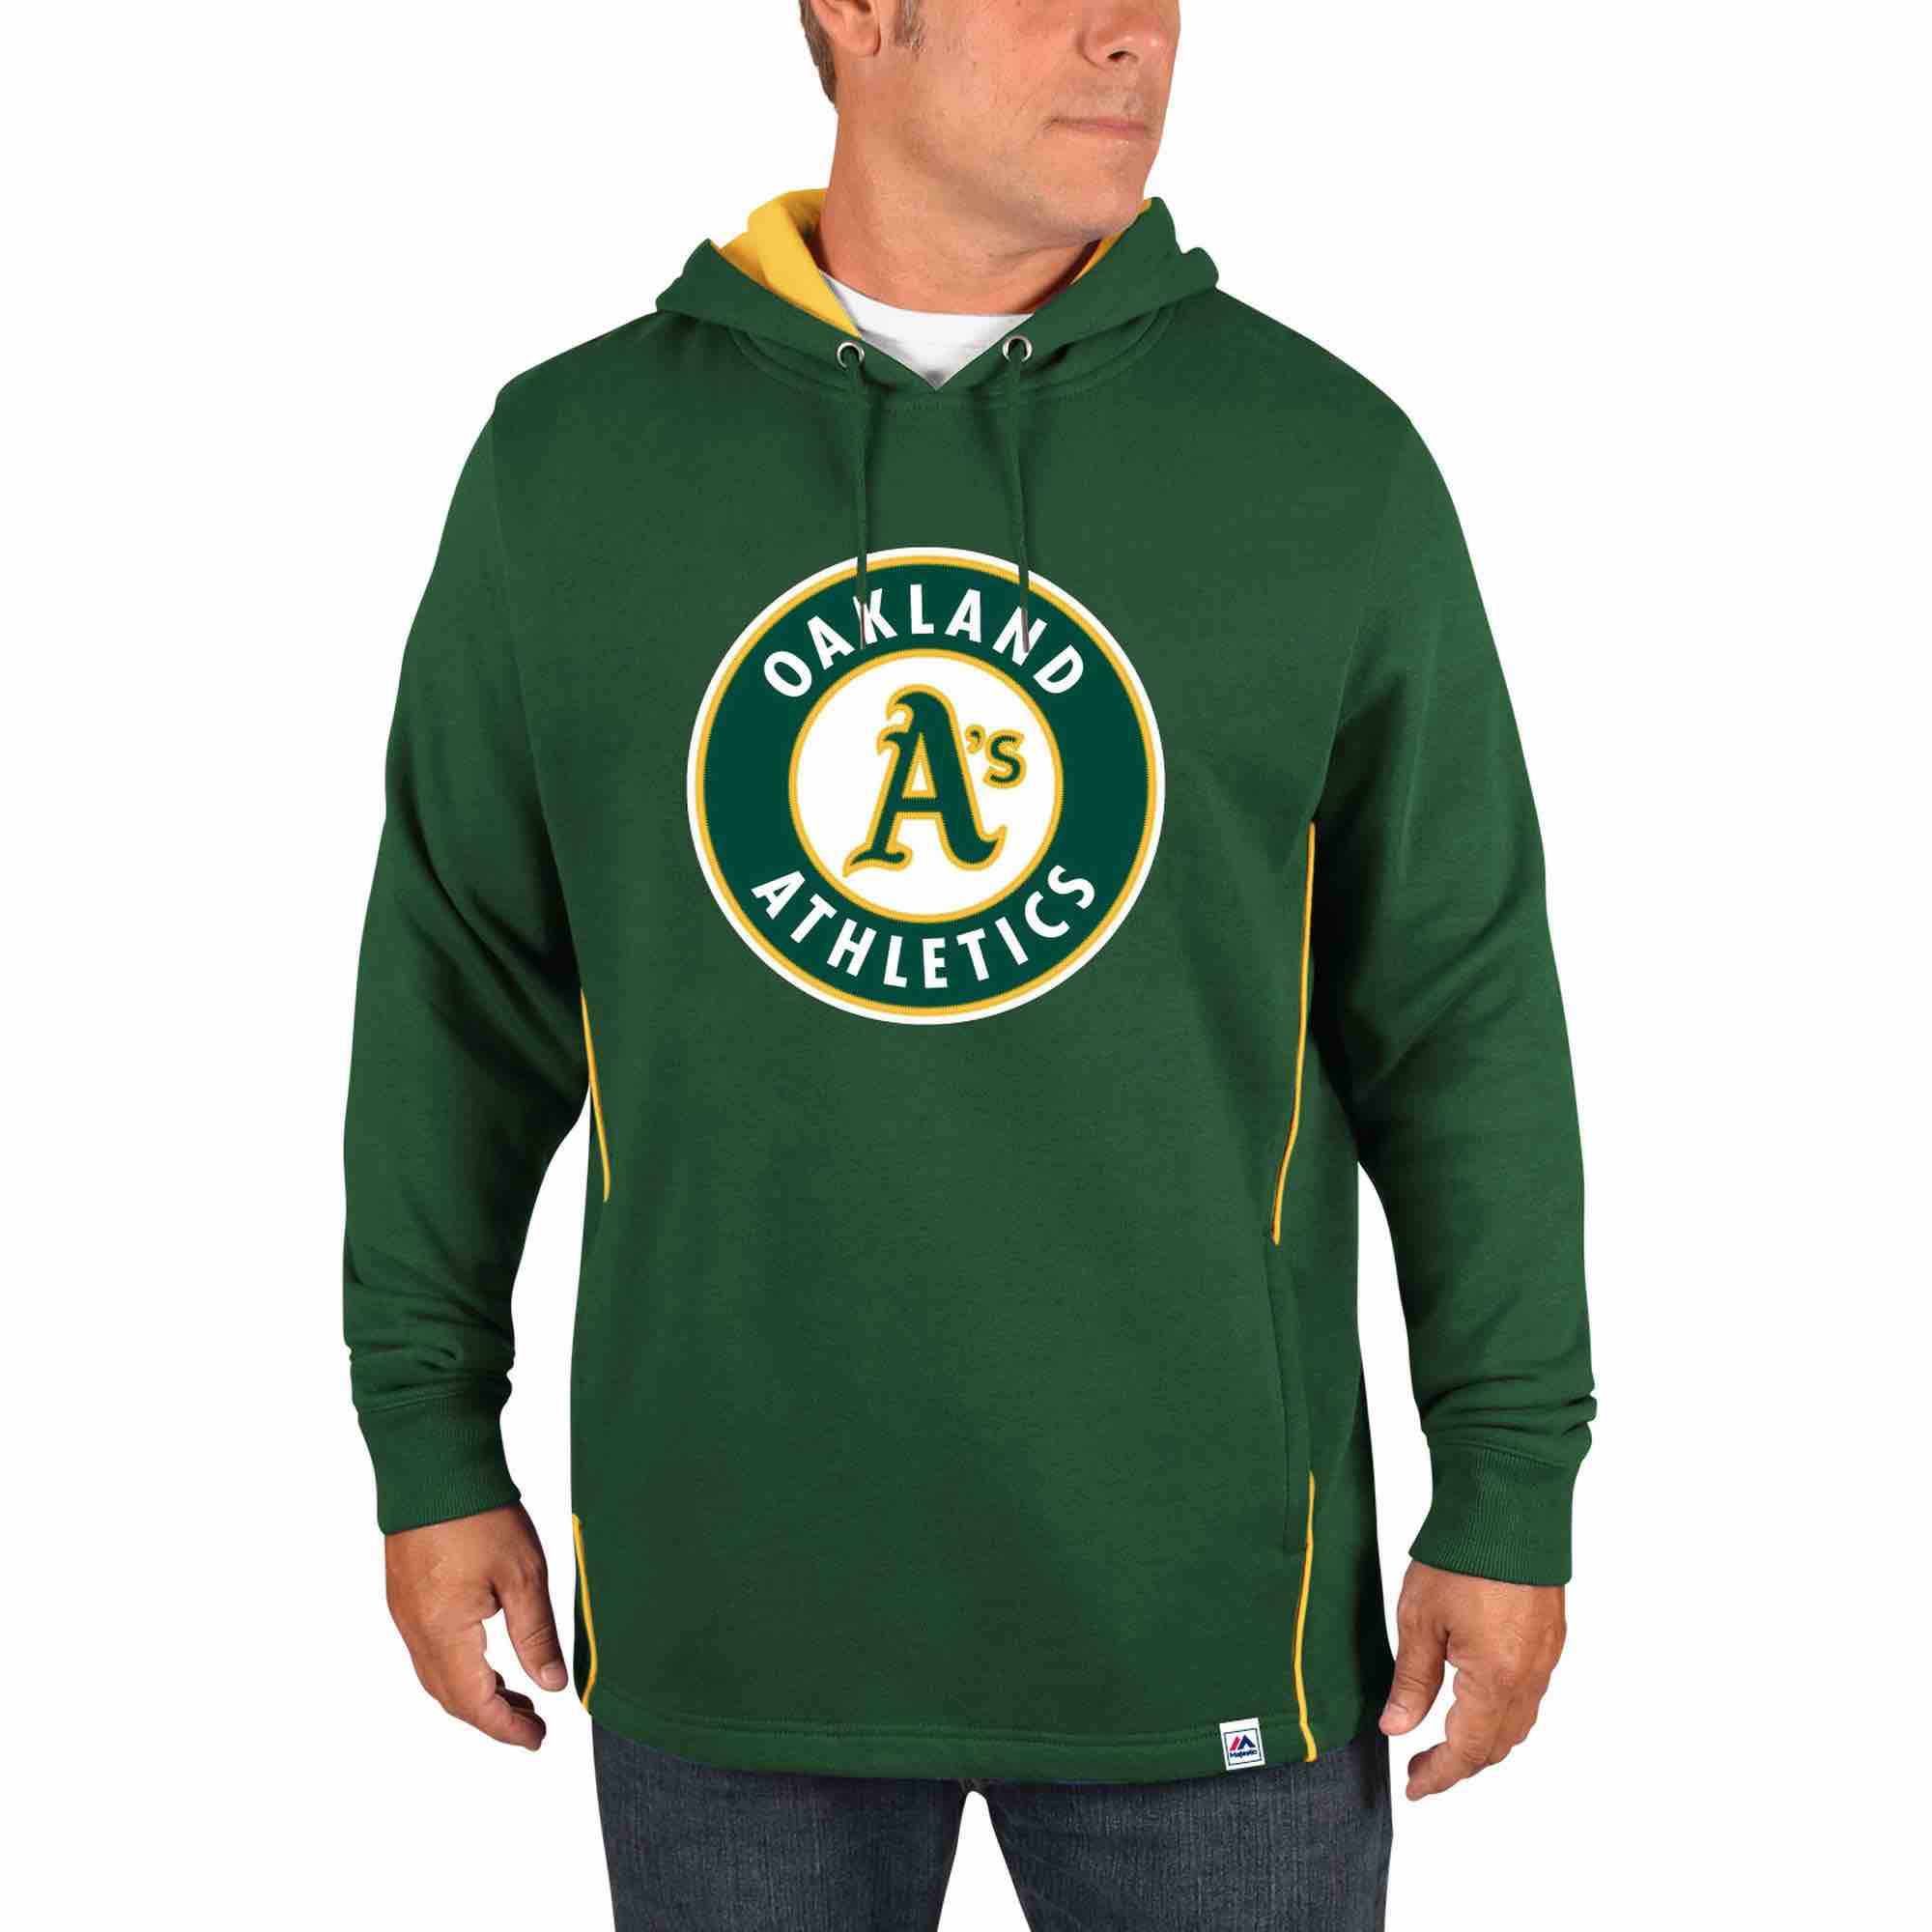 MLB Oakland Athletics Personalized Green Stitched Hoodie